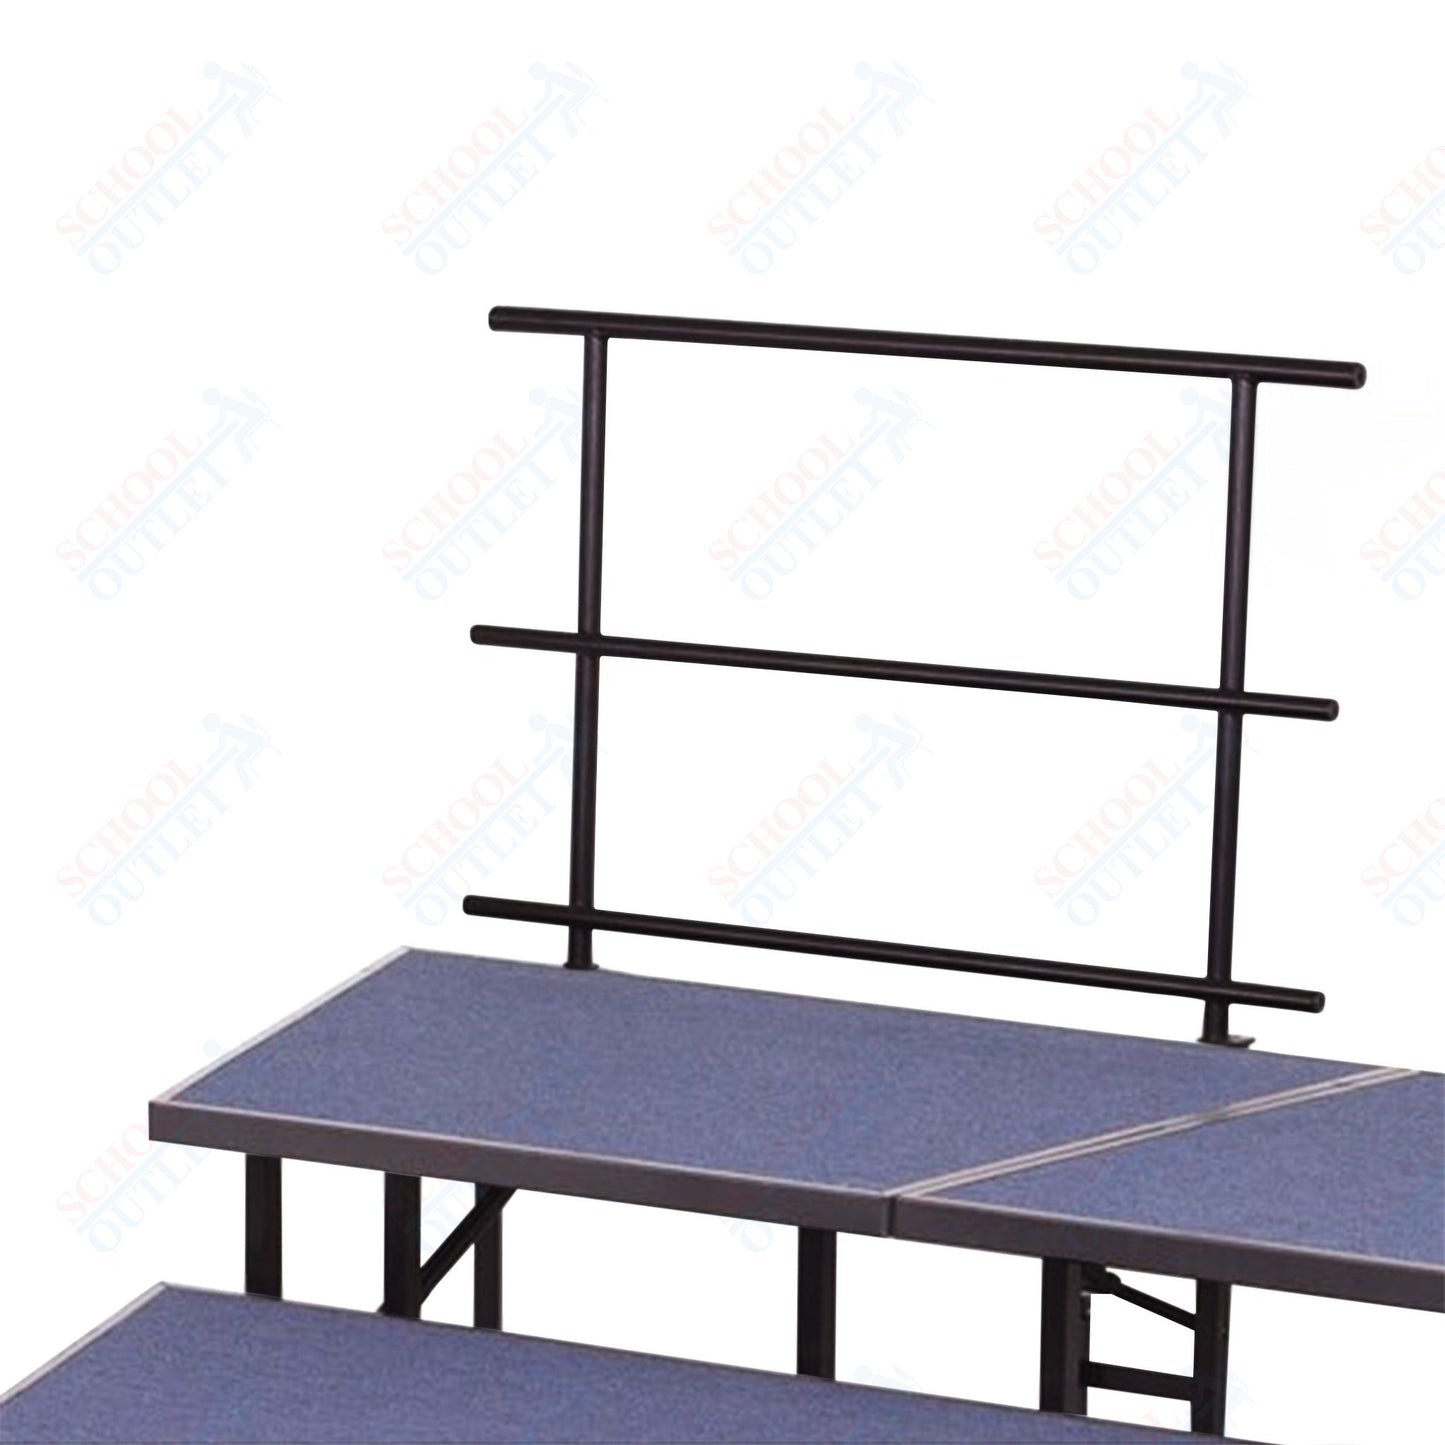 AmTab Stage and Riser Guard Rail - Chair Stop - 25"W x 31" H  (AmTab AMT-STGR25)